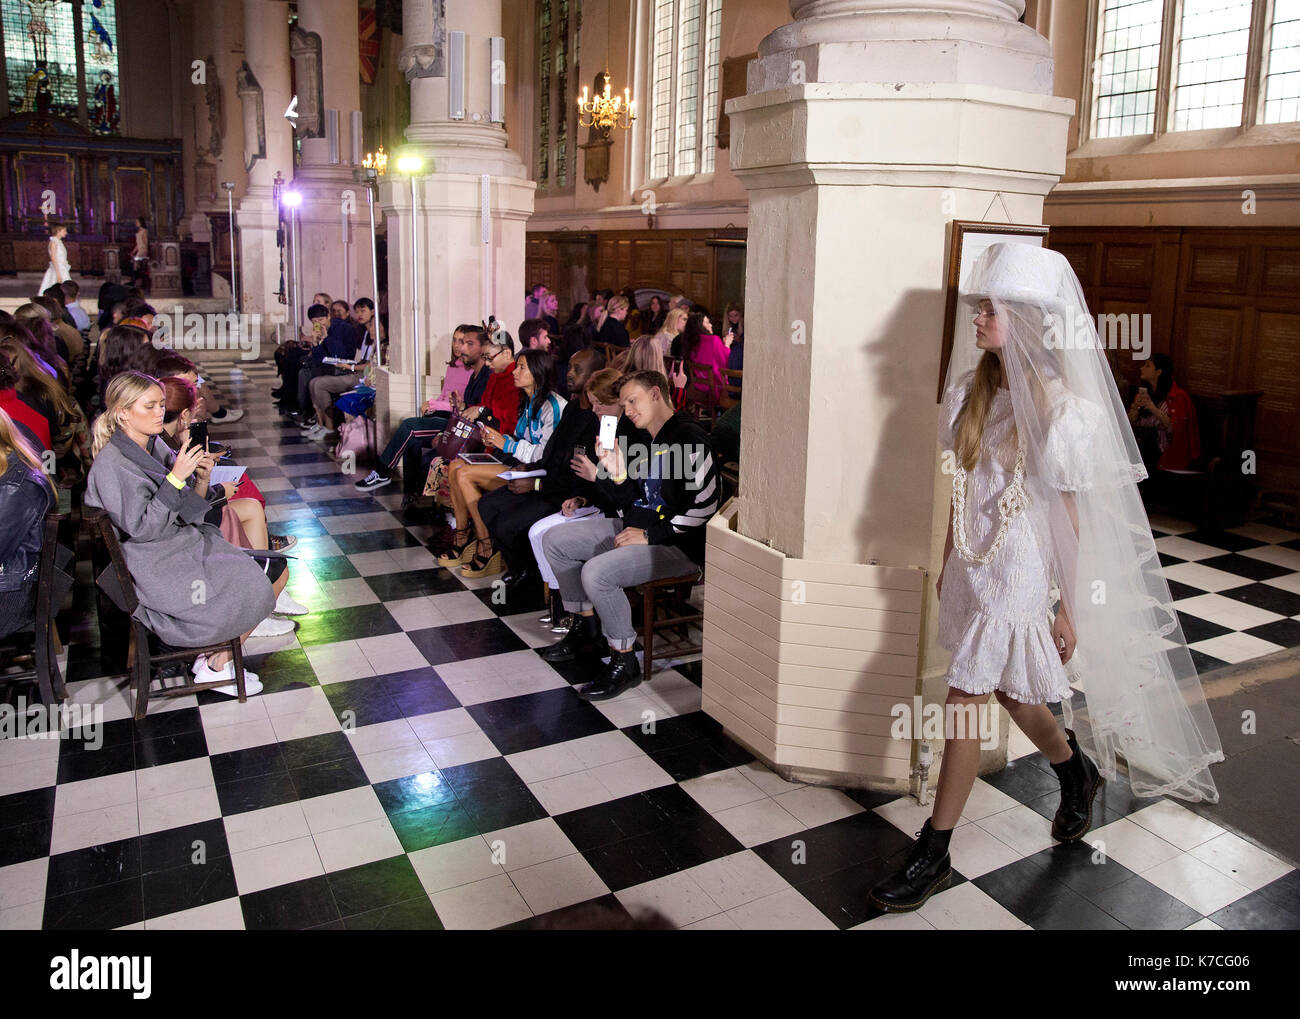 Models on the catwalk during the Ryan LO at London Fashion Week SS18 show held at St Sepulchre-without-Newgate Church, London. PRESS ASSOCIATION. Picture date: Friday September 15, 2017. Photo credit should read: Isabel Infantes/PA Wire Stock Photo